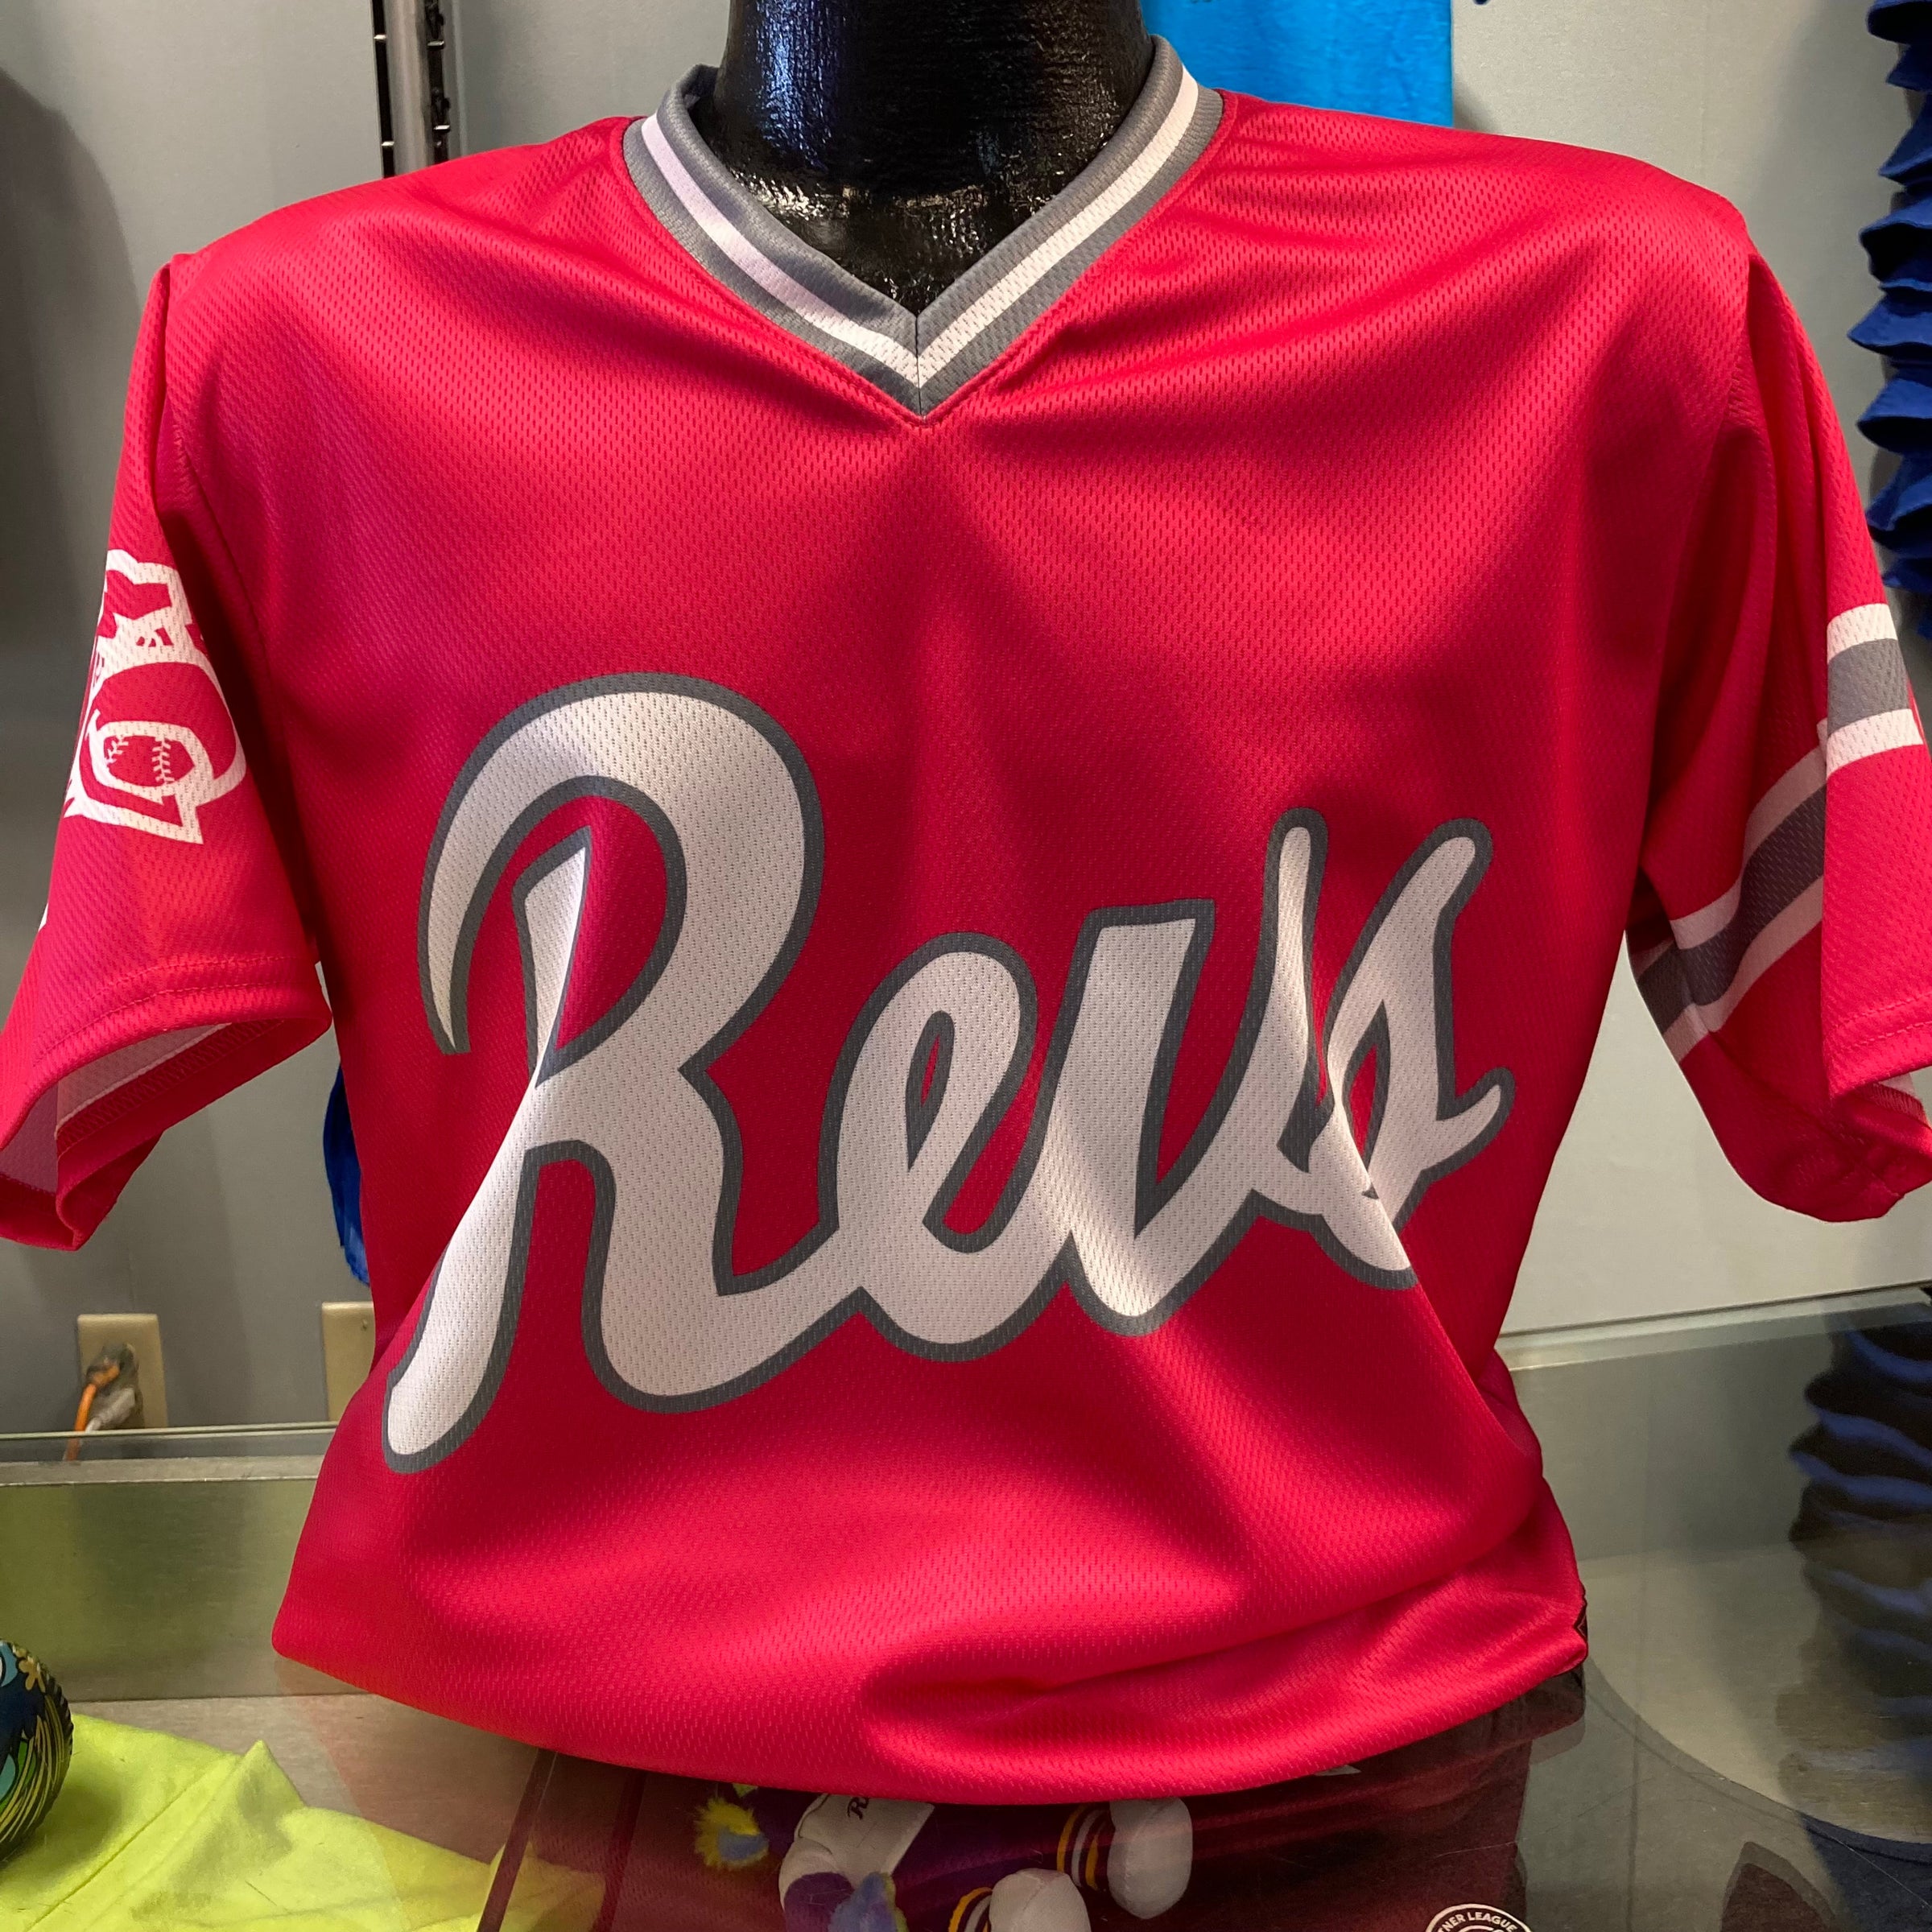 York Revolution's 2020 jersey auction to honor 'Hometown Heroes